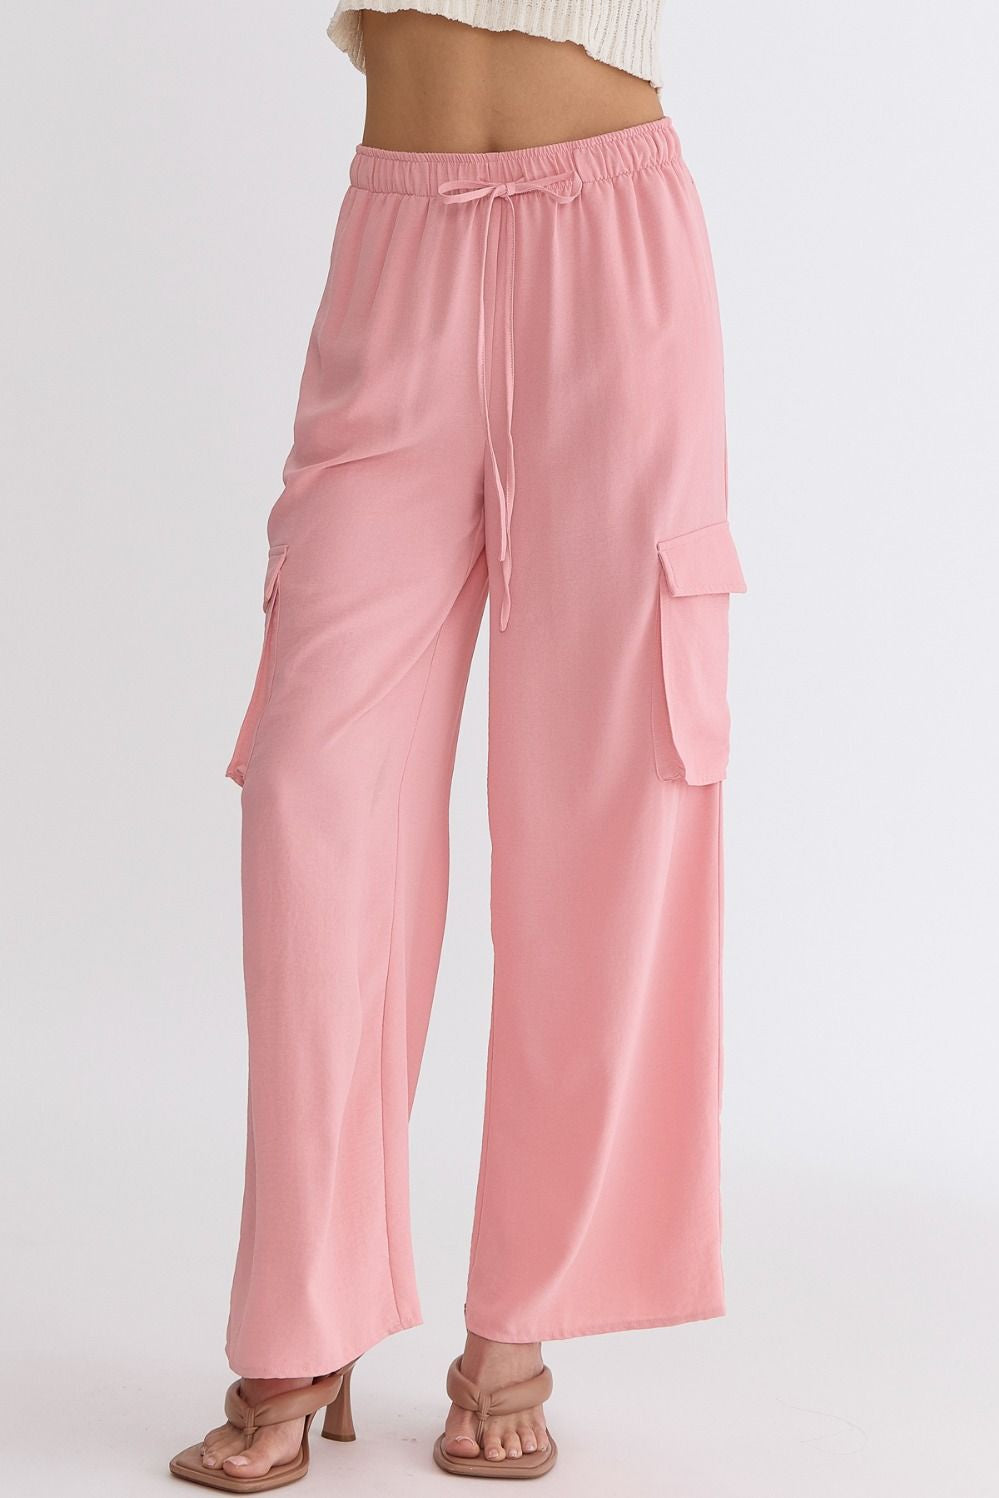 Stay With Me Cargo Pants - Baby Pink